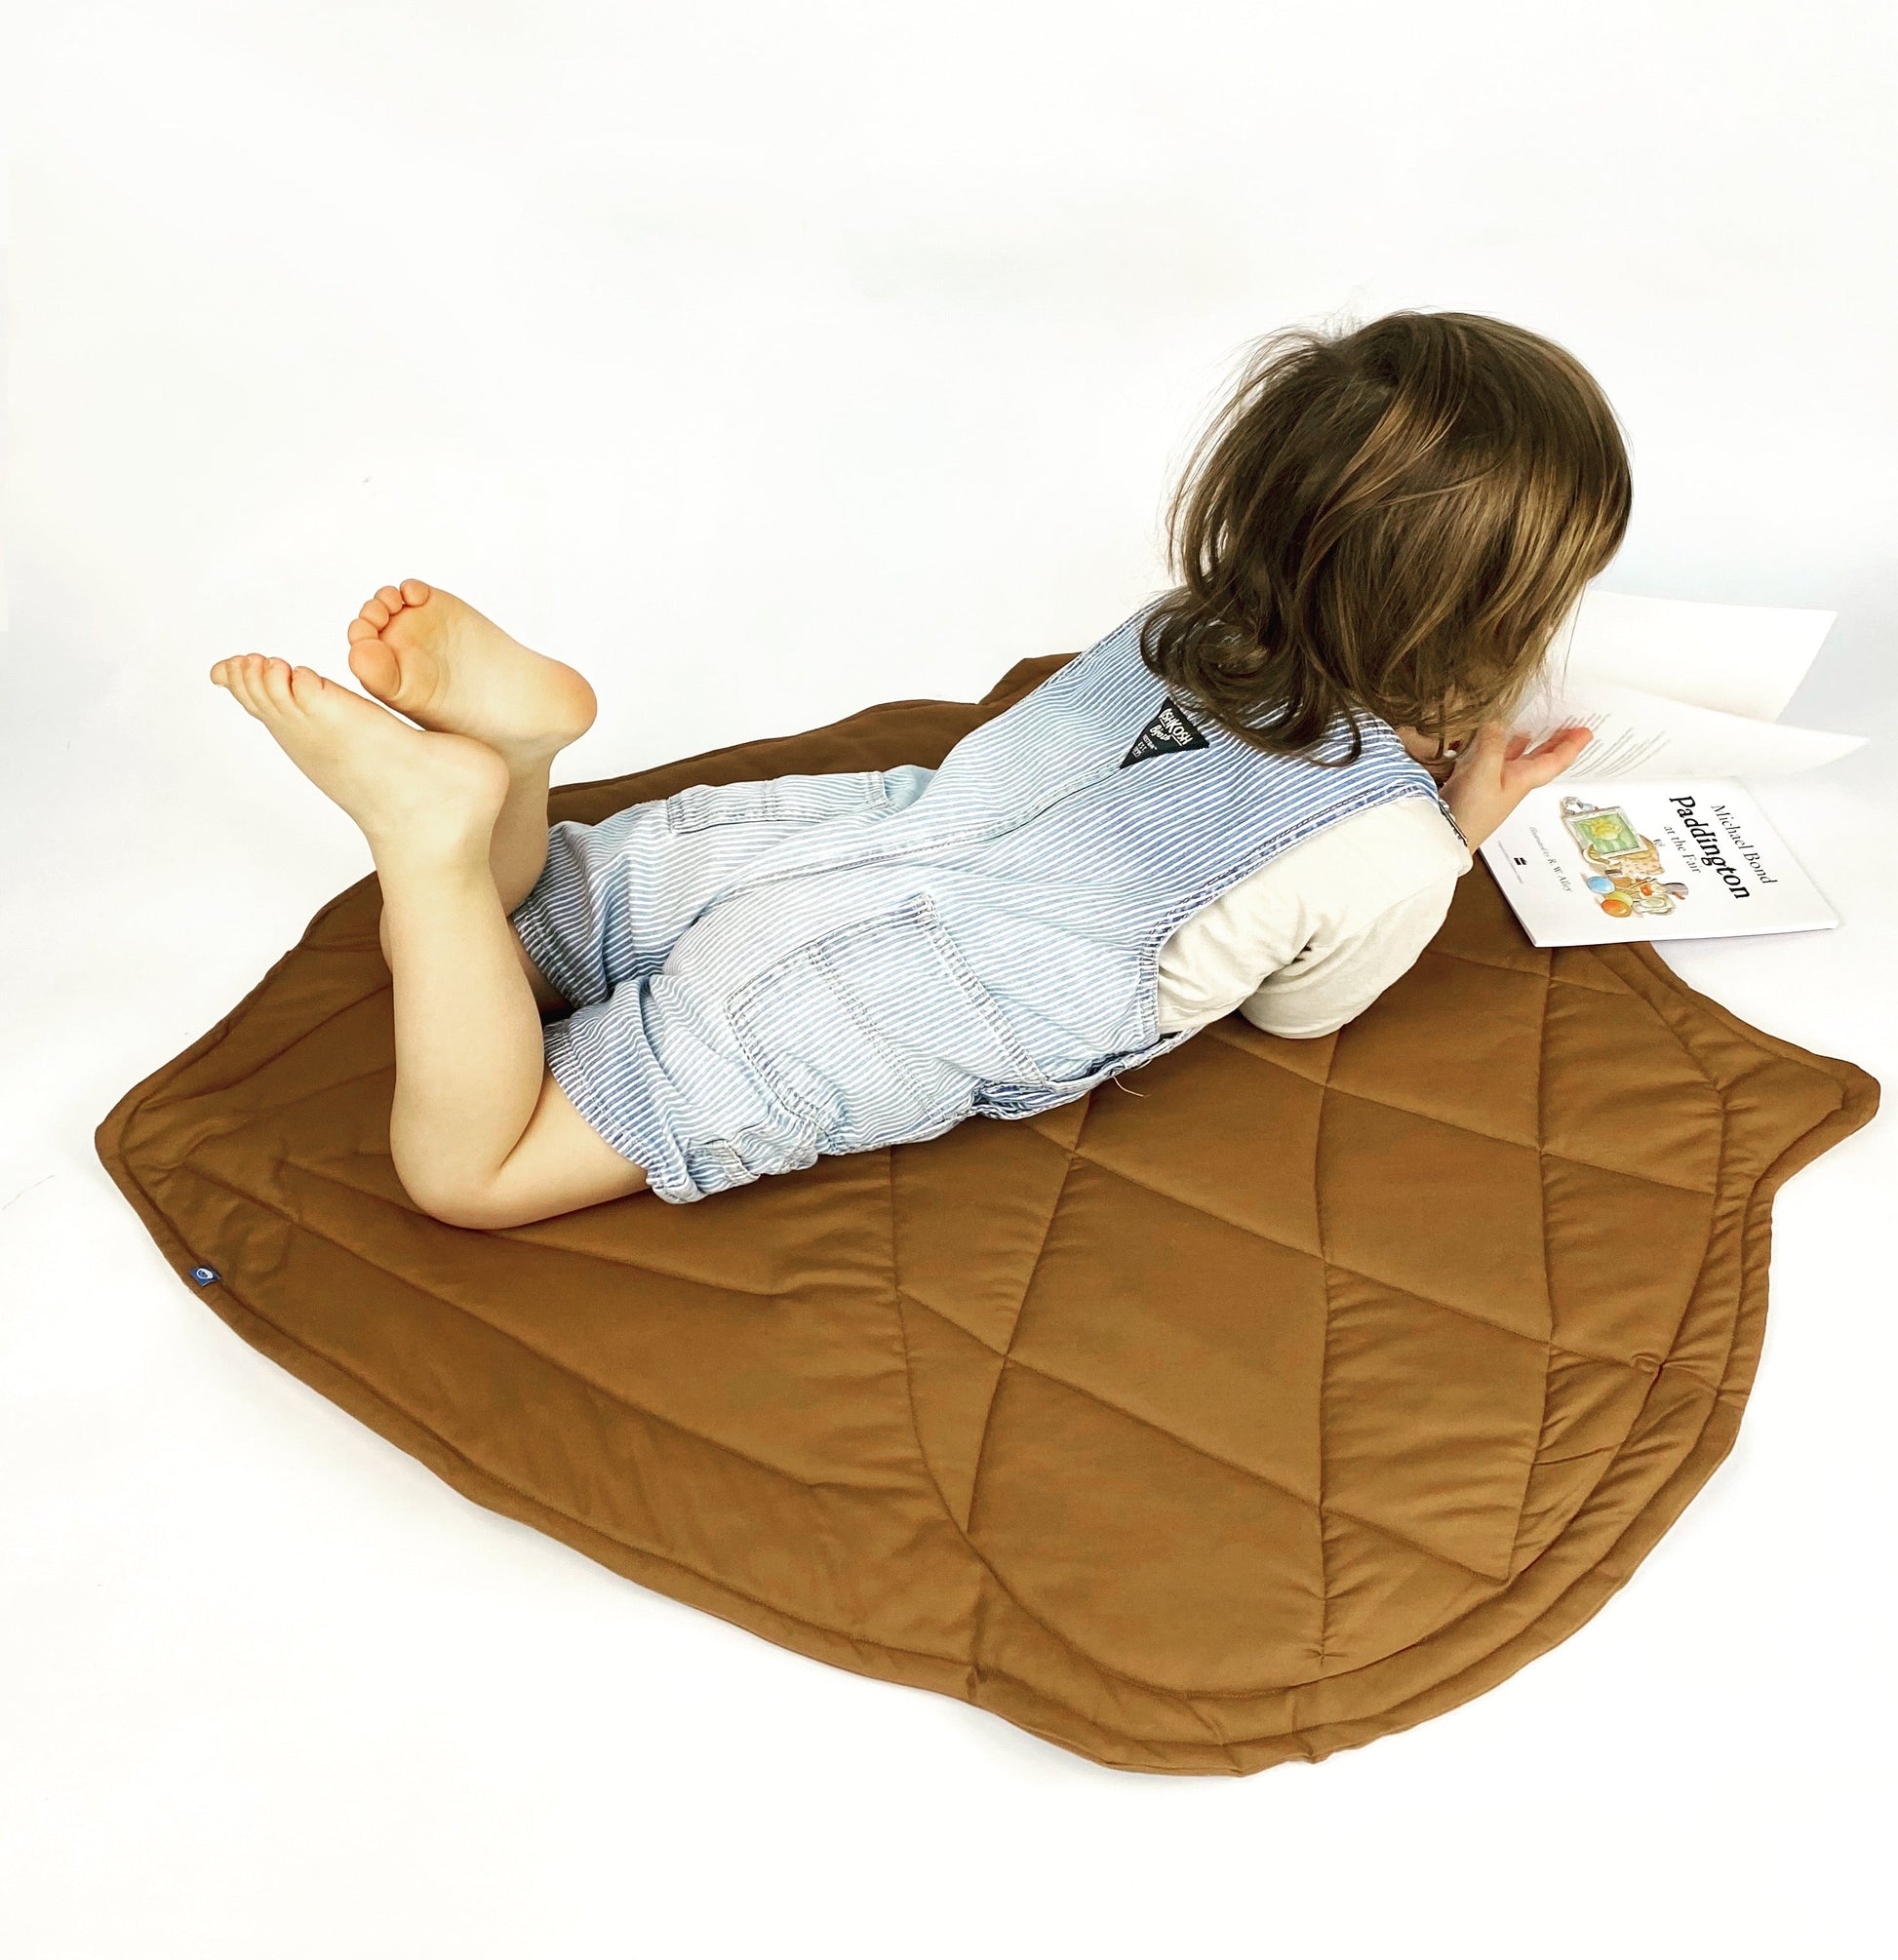 Toddler and children can use the acorn mat to read books and snuggle up.